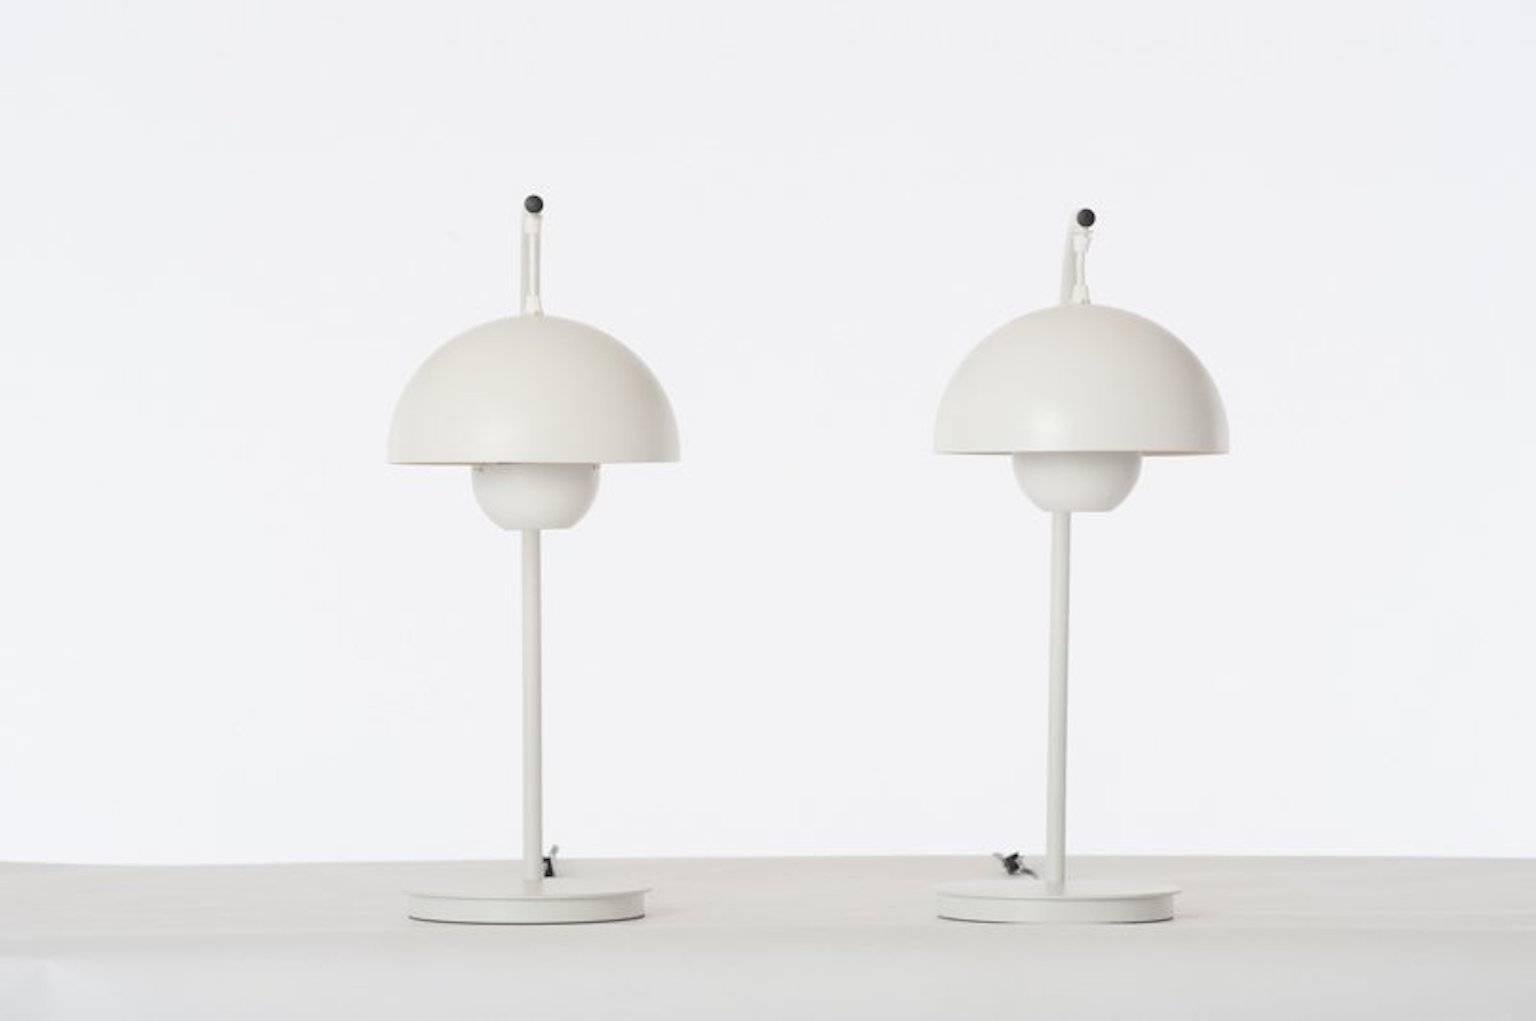 George Kovacs-designed table lamps in original, vintage condition. White aluminum with matte plastic shade. Pricing is for the pair.